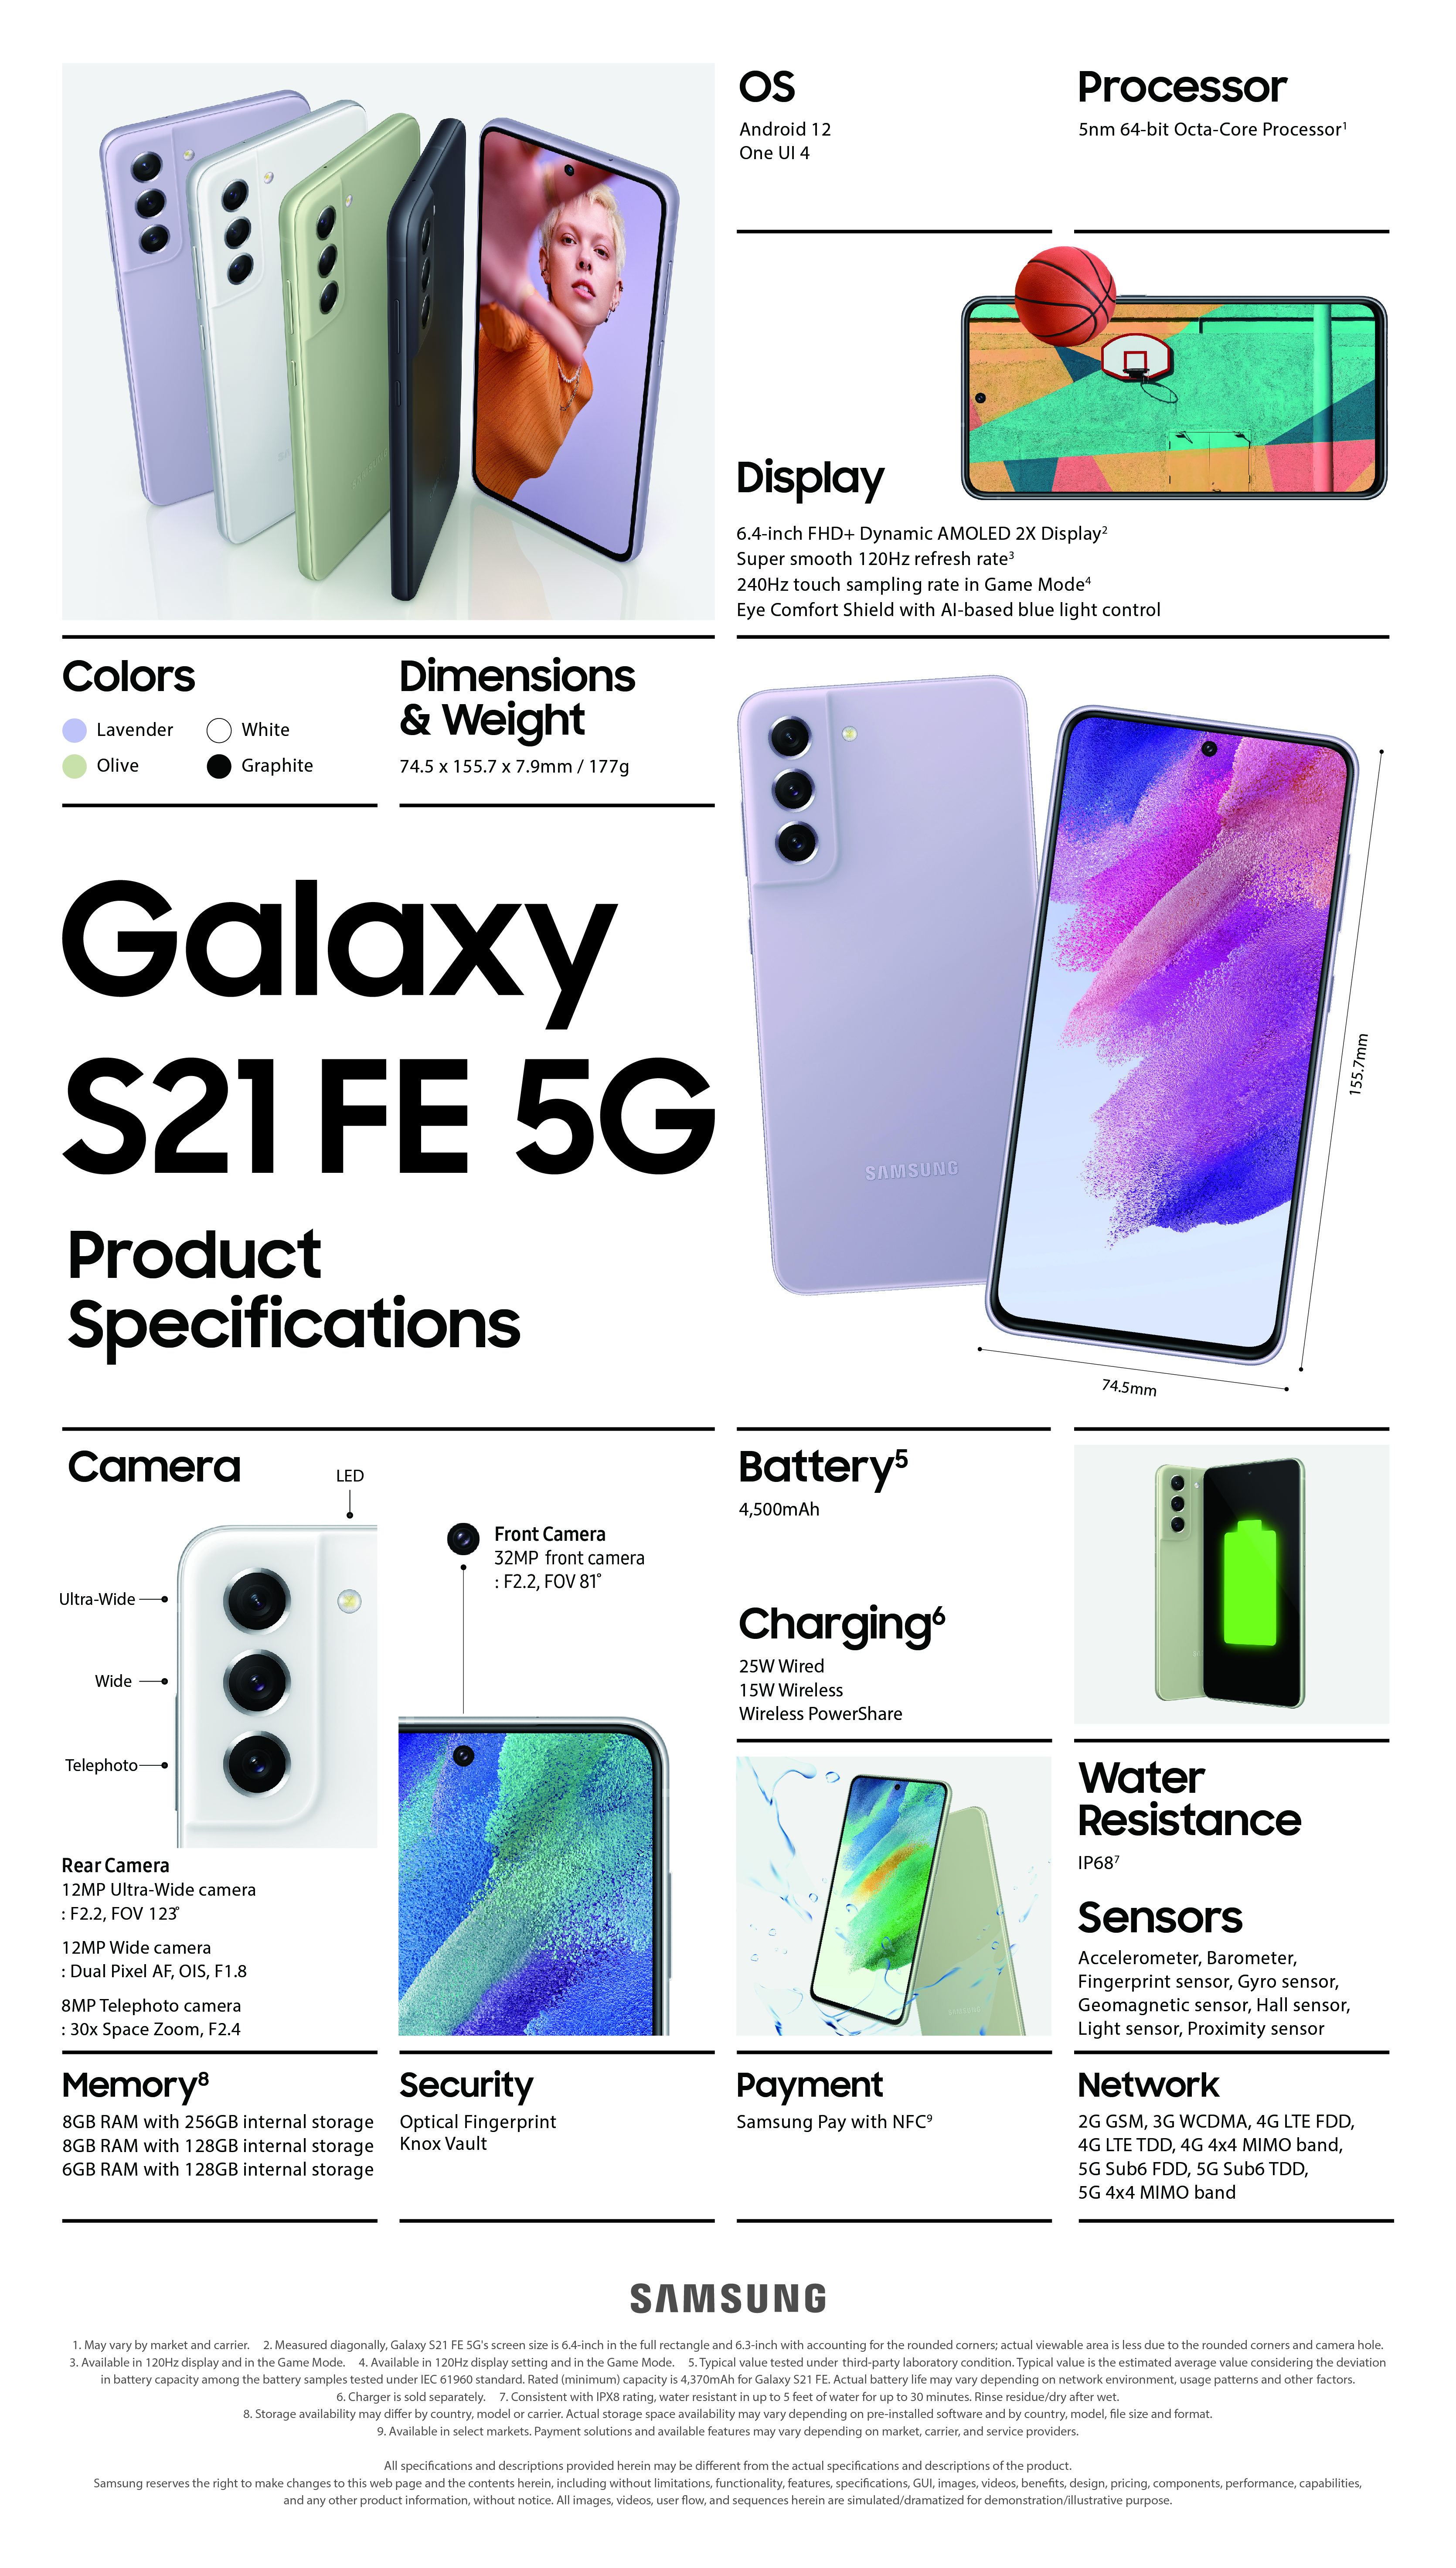 01_galaxy_s21_fe_5g_specification_infographic.jpg